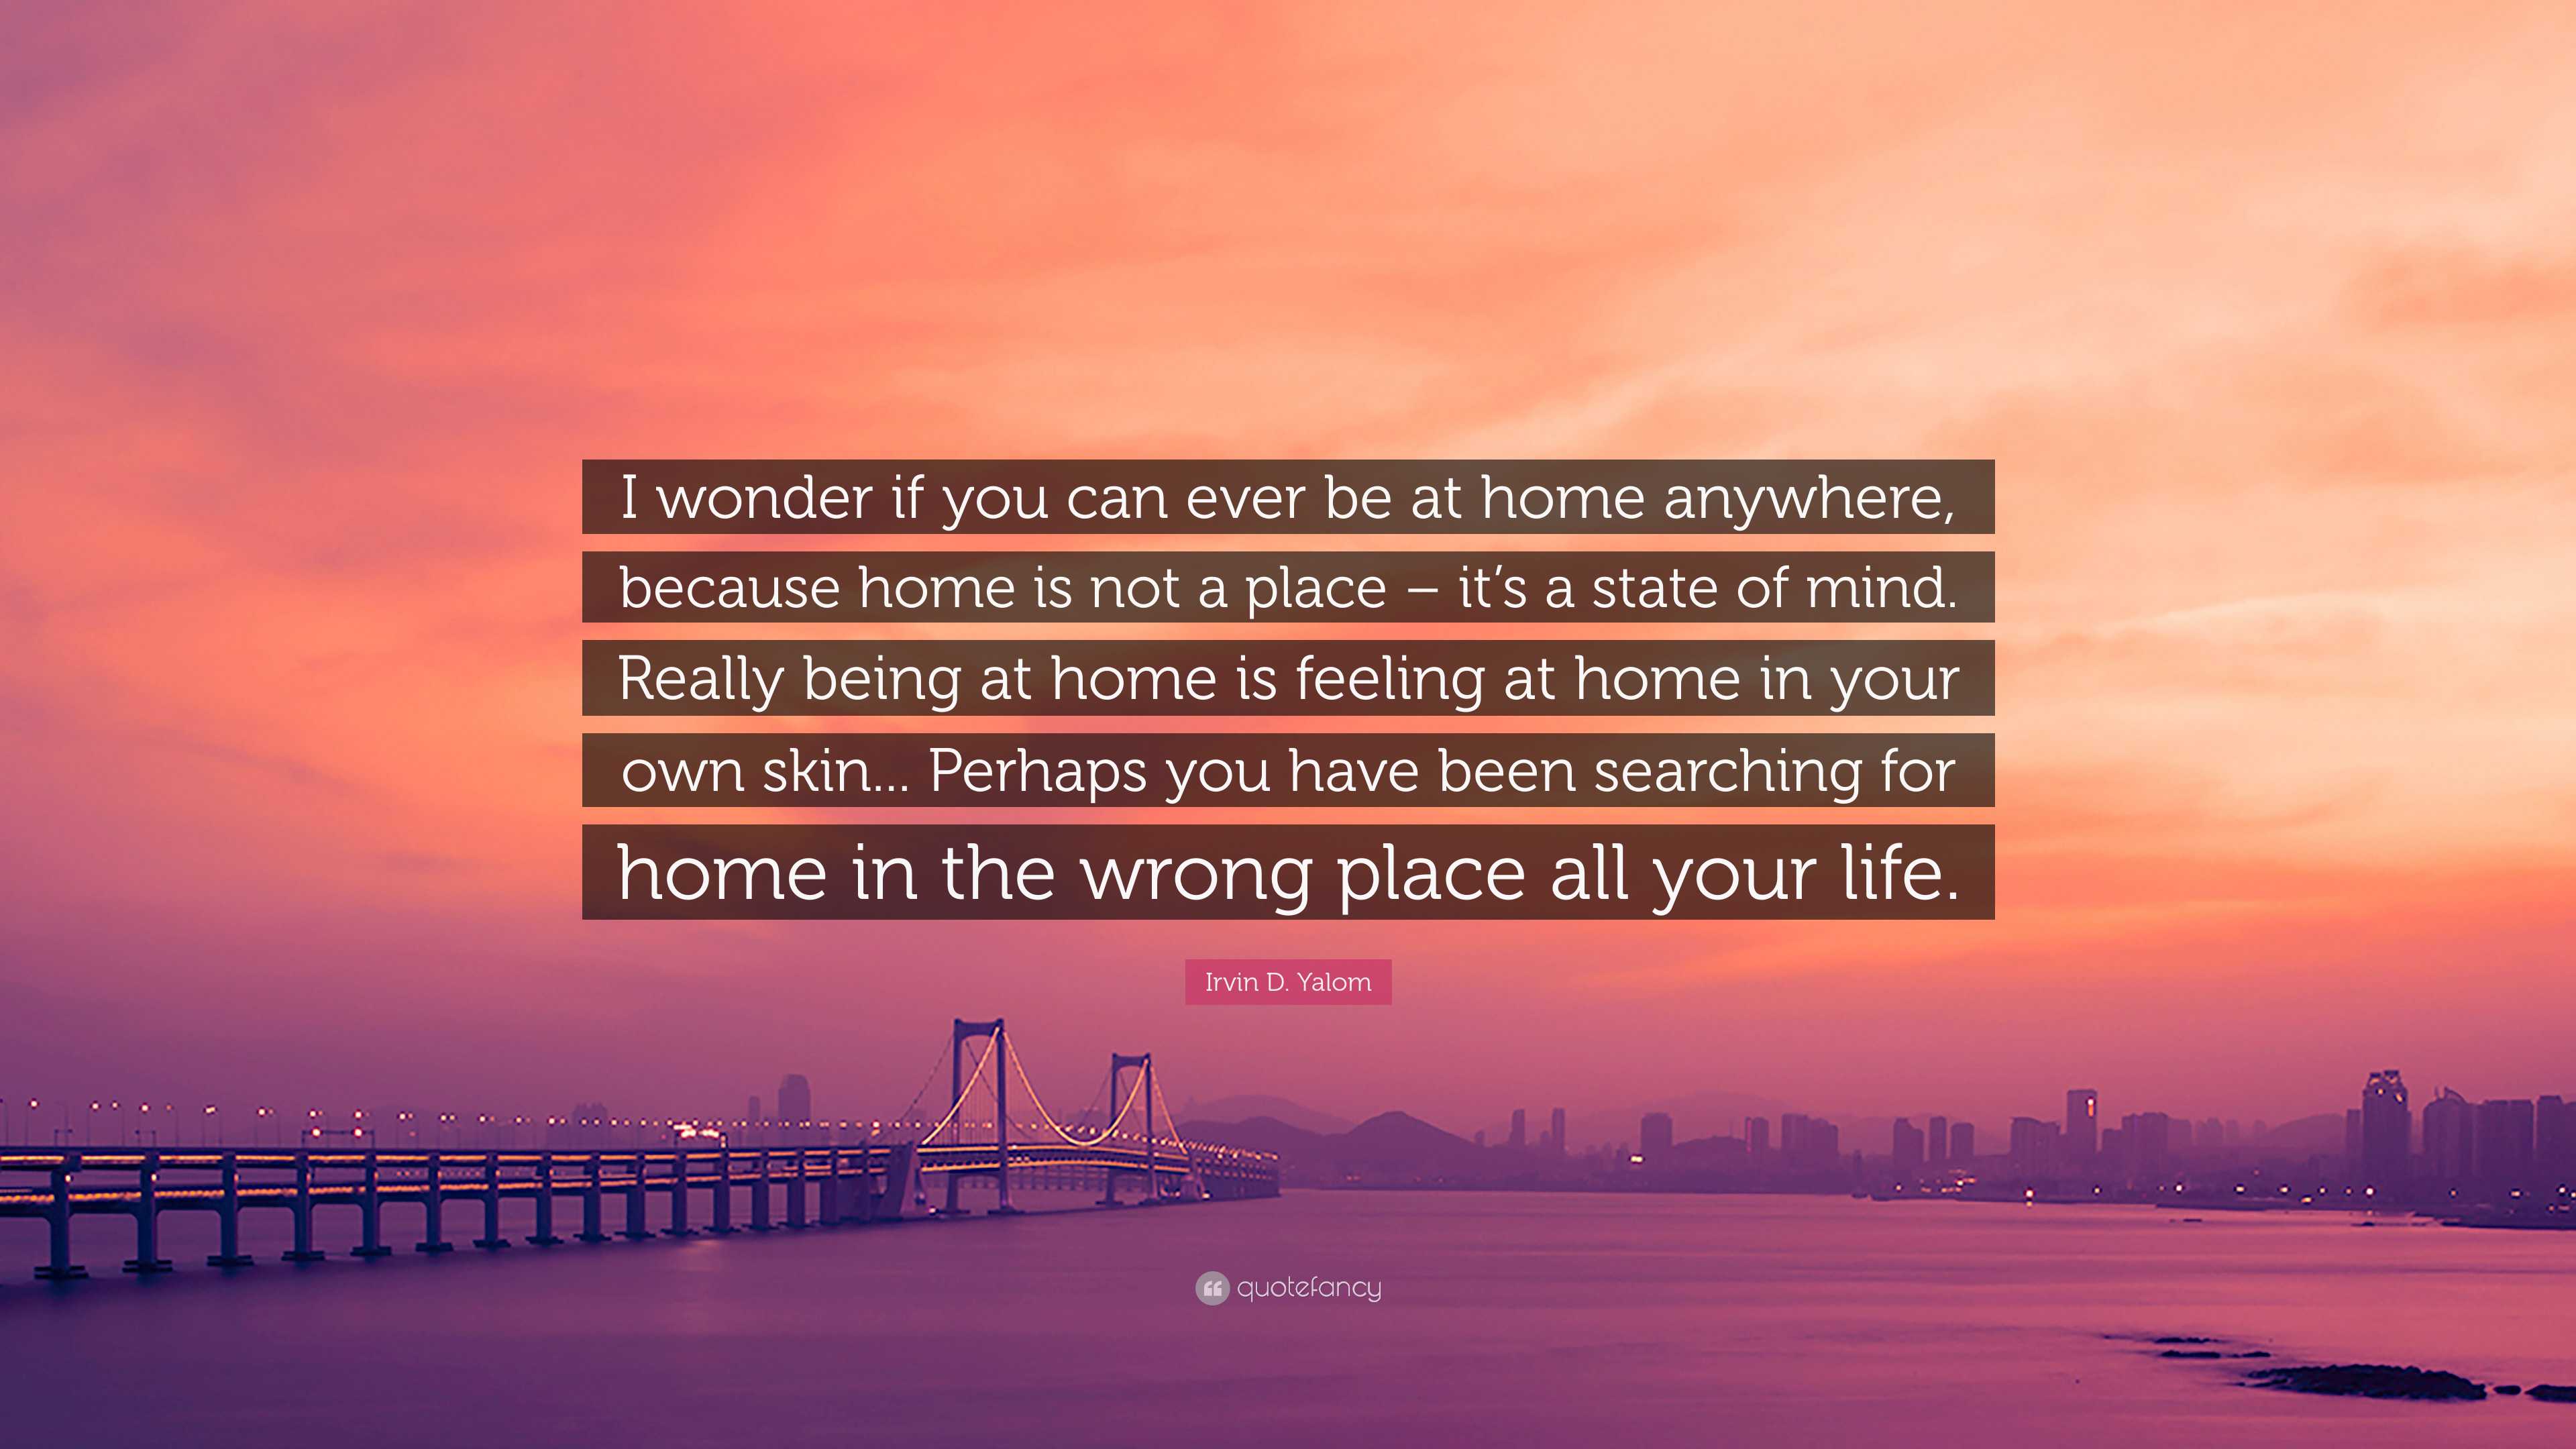 Irvin D. Yalom Quote: “I wonder if you can ever be at home anywhere,  because home is not a place – it's a state of mind. Really being at home  i”